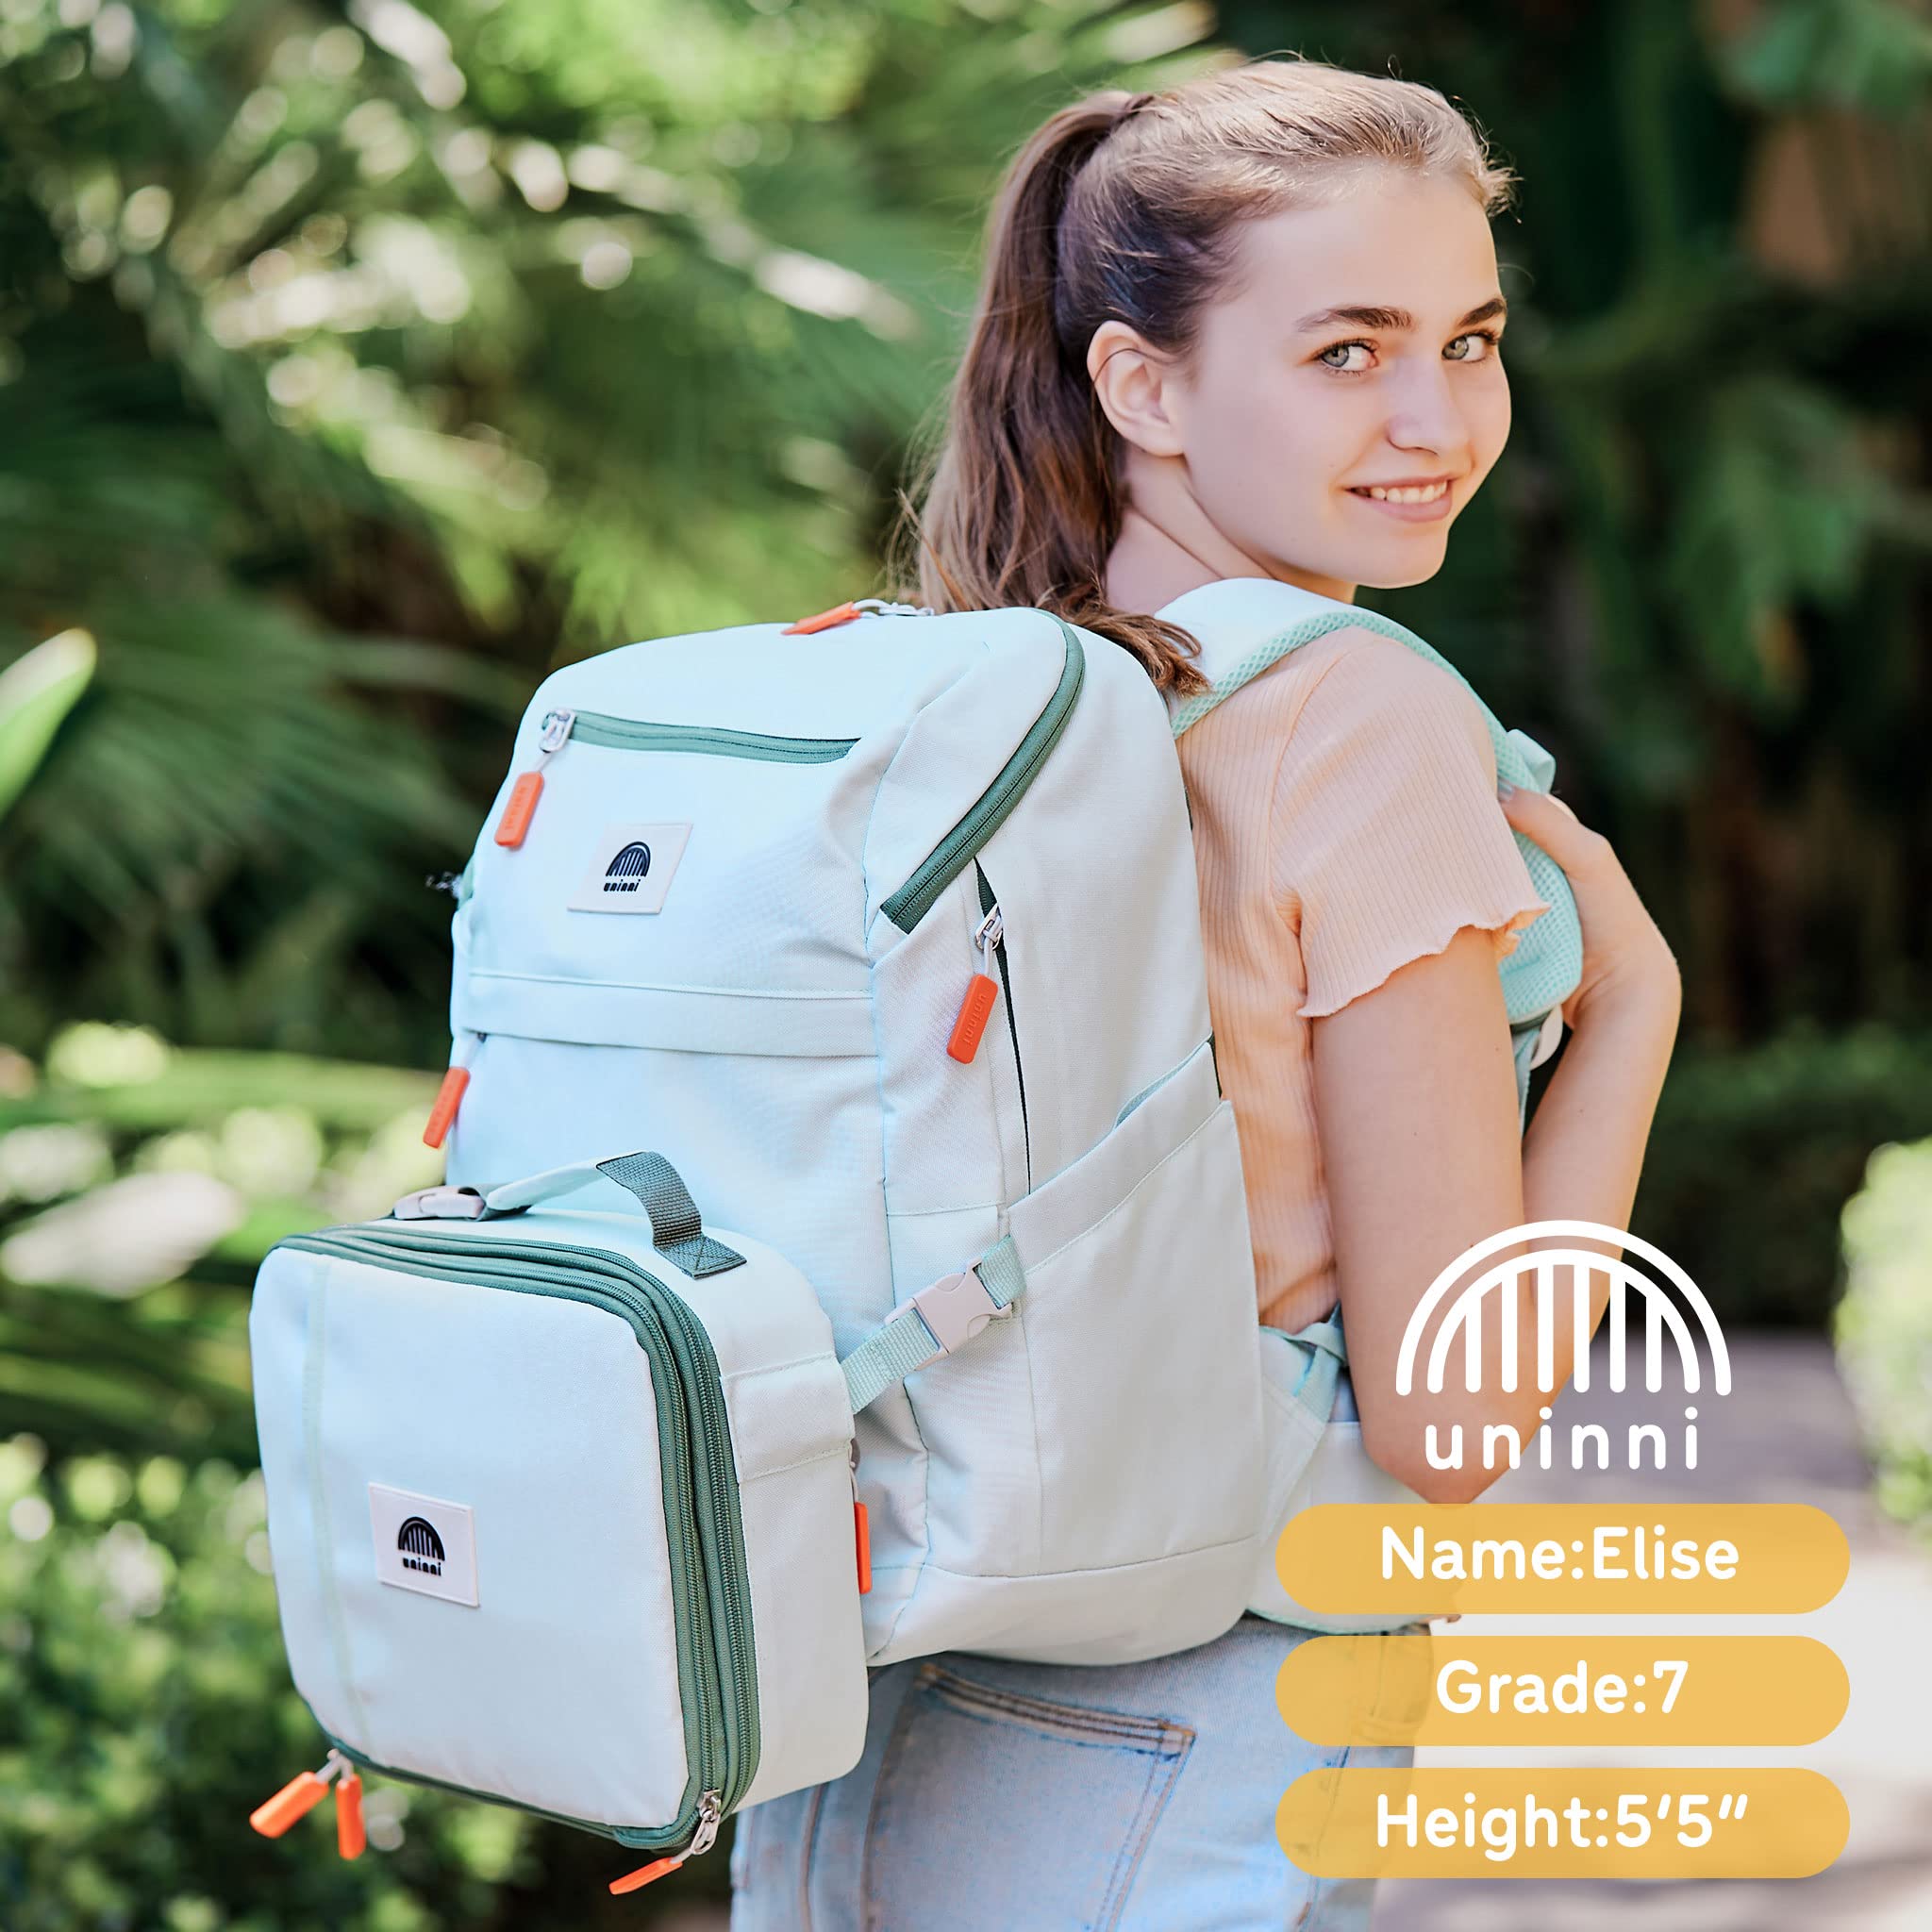 uninni Mint 16'' Kids Backpack Set for Age 6+,fits for height 3'9" above kids with Lightweight Insulated Lunch Bag and Cute Pencil Case for Boys and Girls